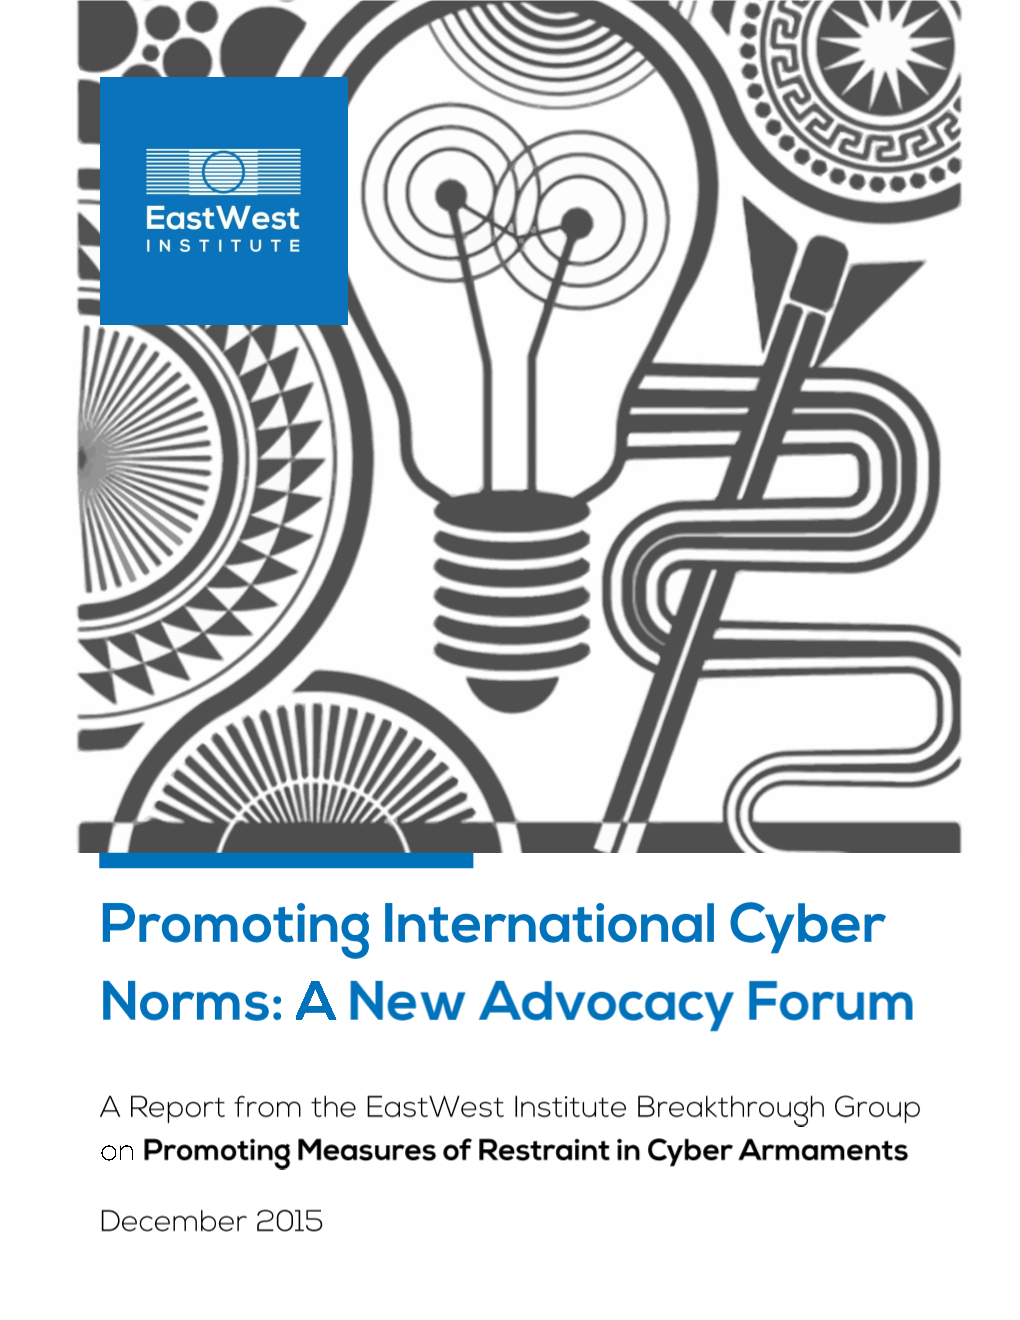 Promoting International Cyber Norms